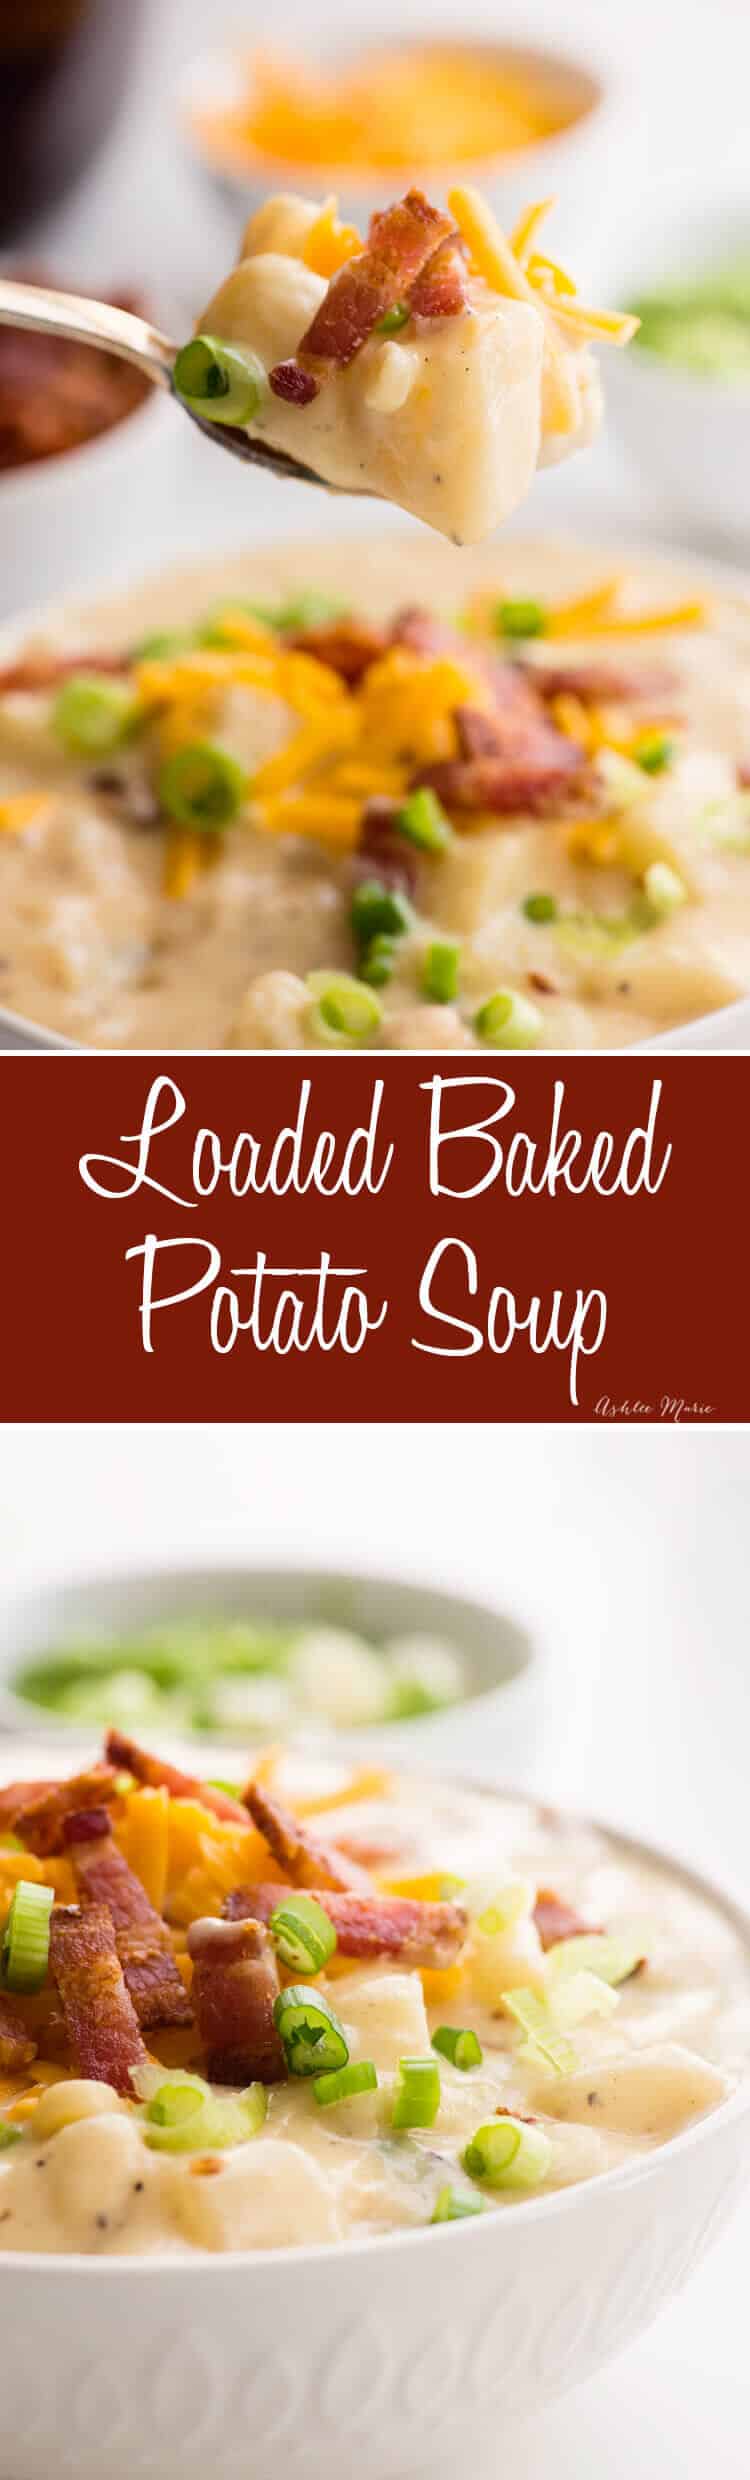 one pot loaded baked potato soup - creamy, rich and filling - the perfect comfort food